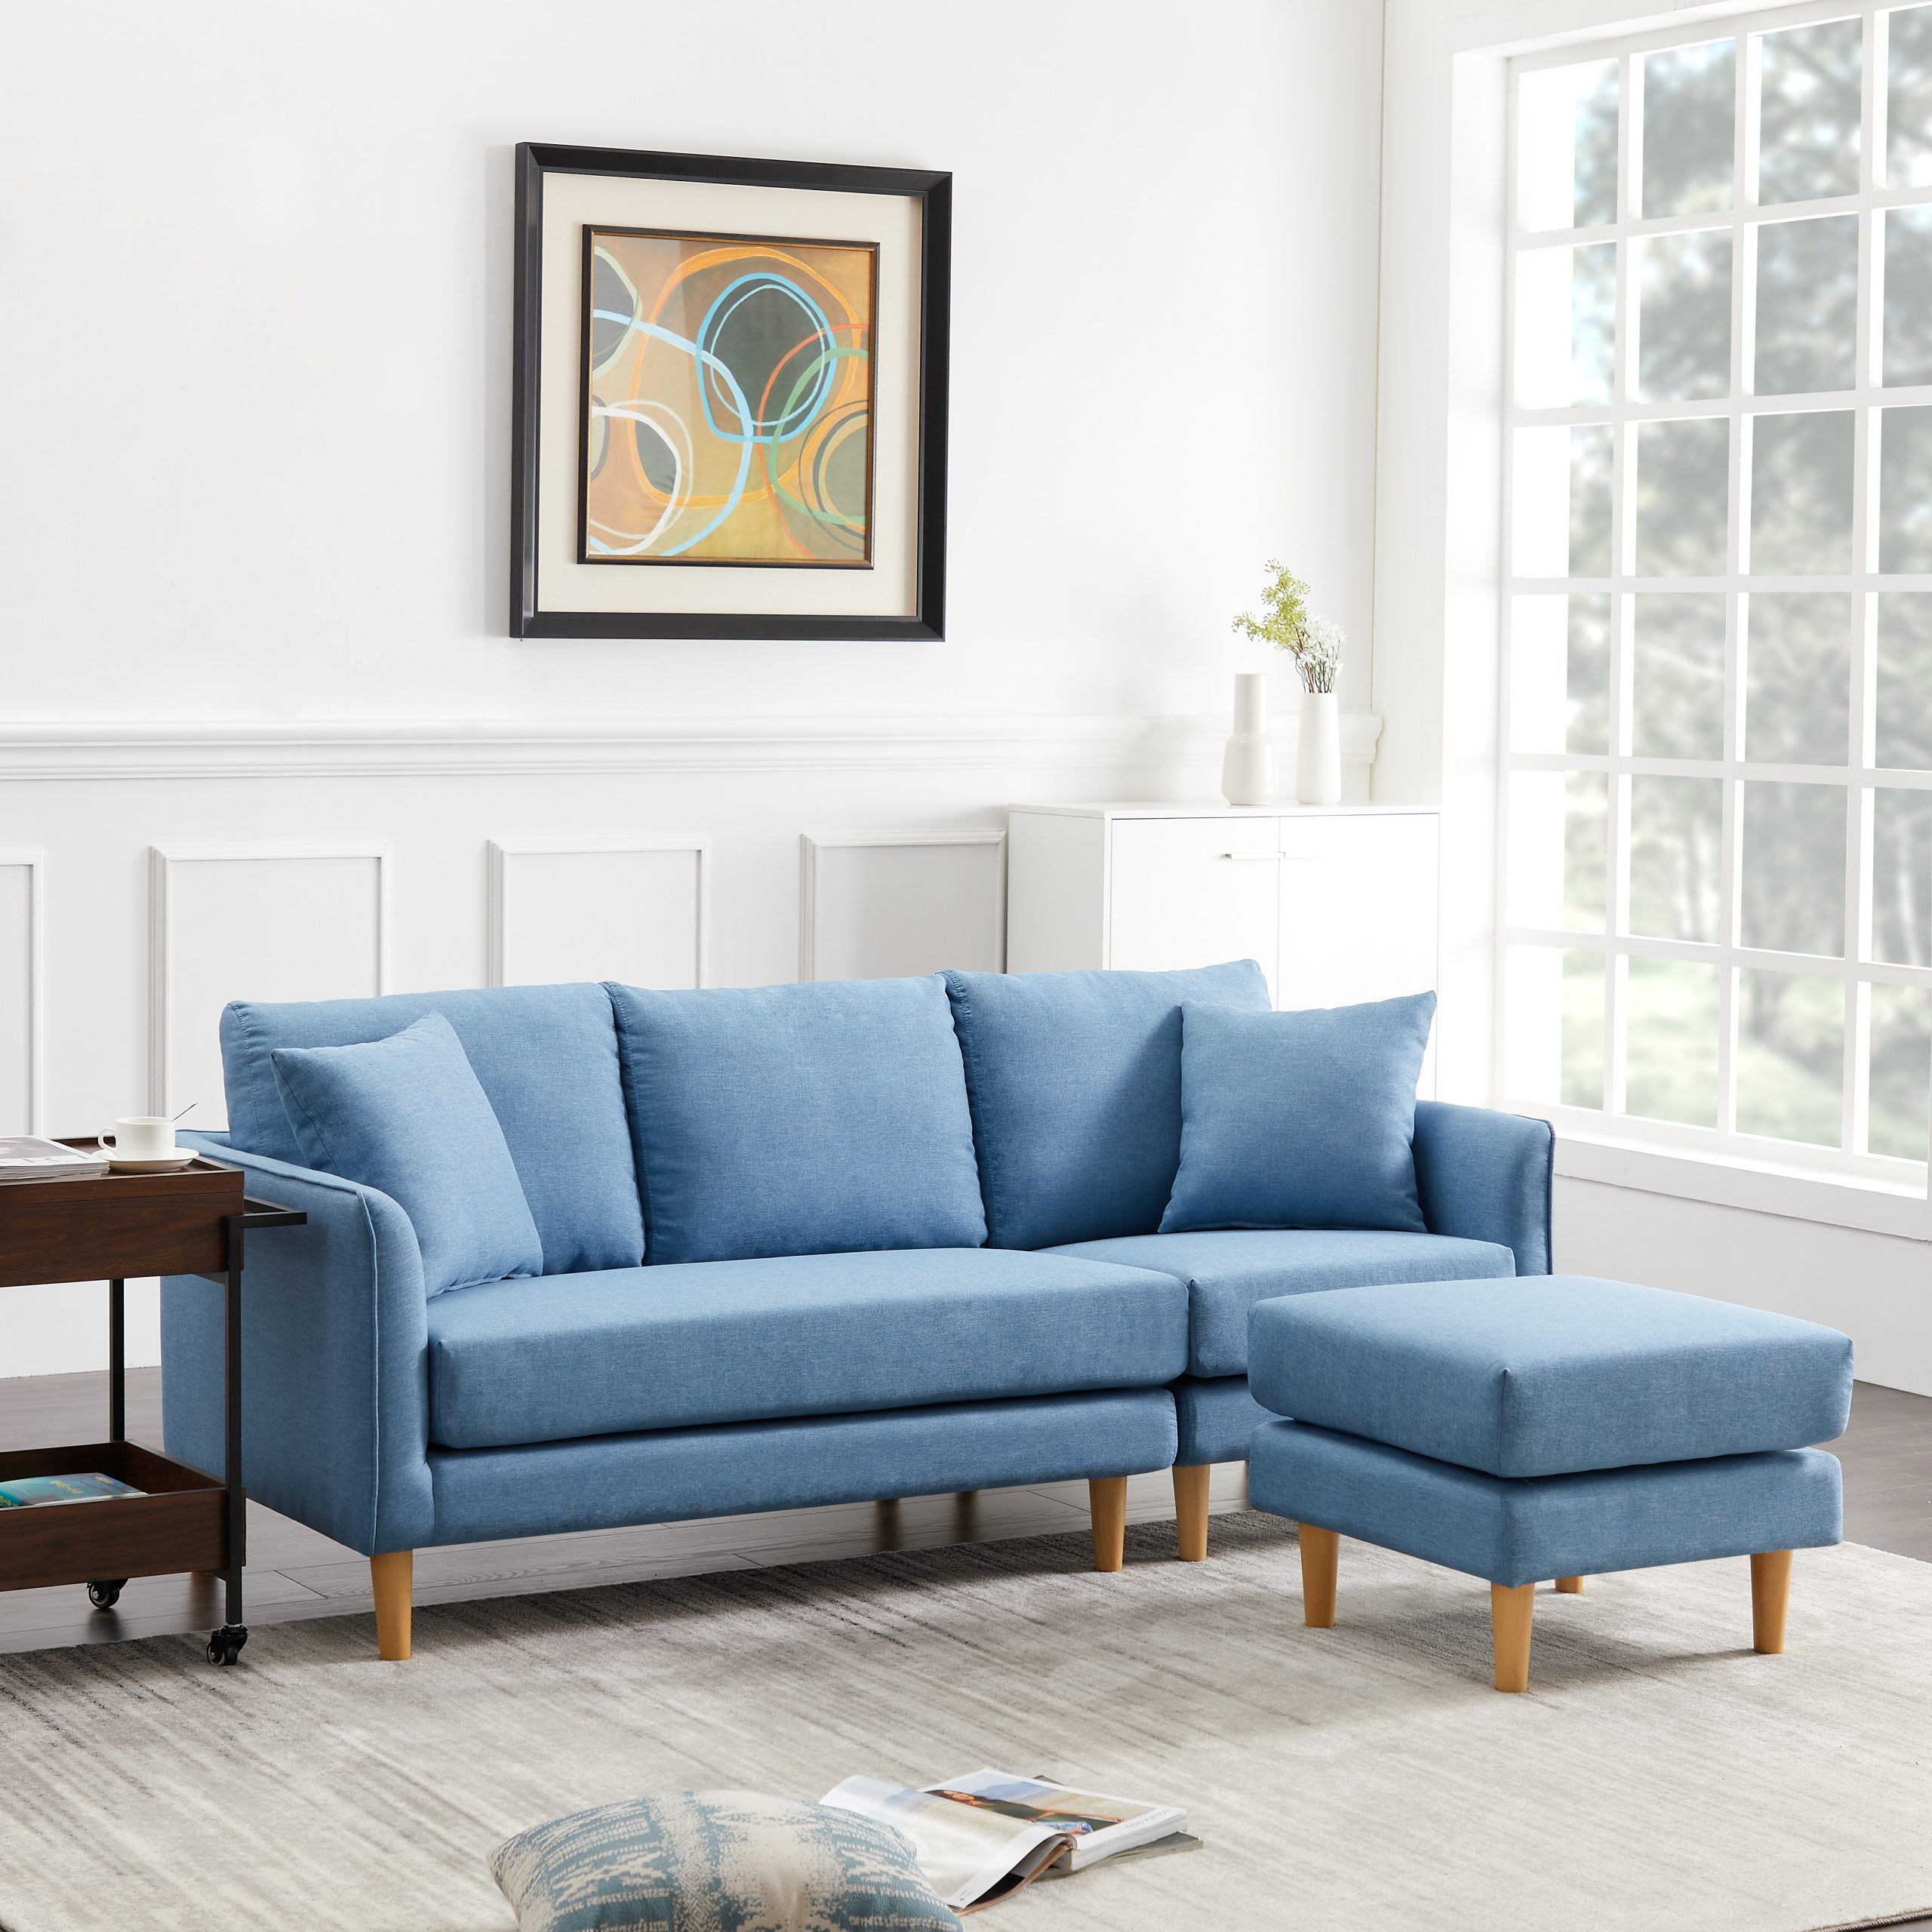 Urhomepro Reversible Sectional Sofa Couch, Modern 3 Seat Regarding Dove Mid Century Sectional Sofas Dark Blue (View 14 of 15)